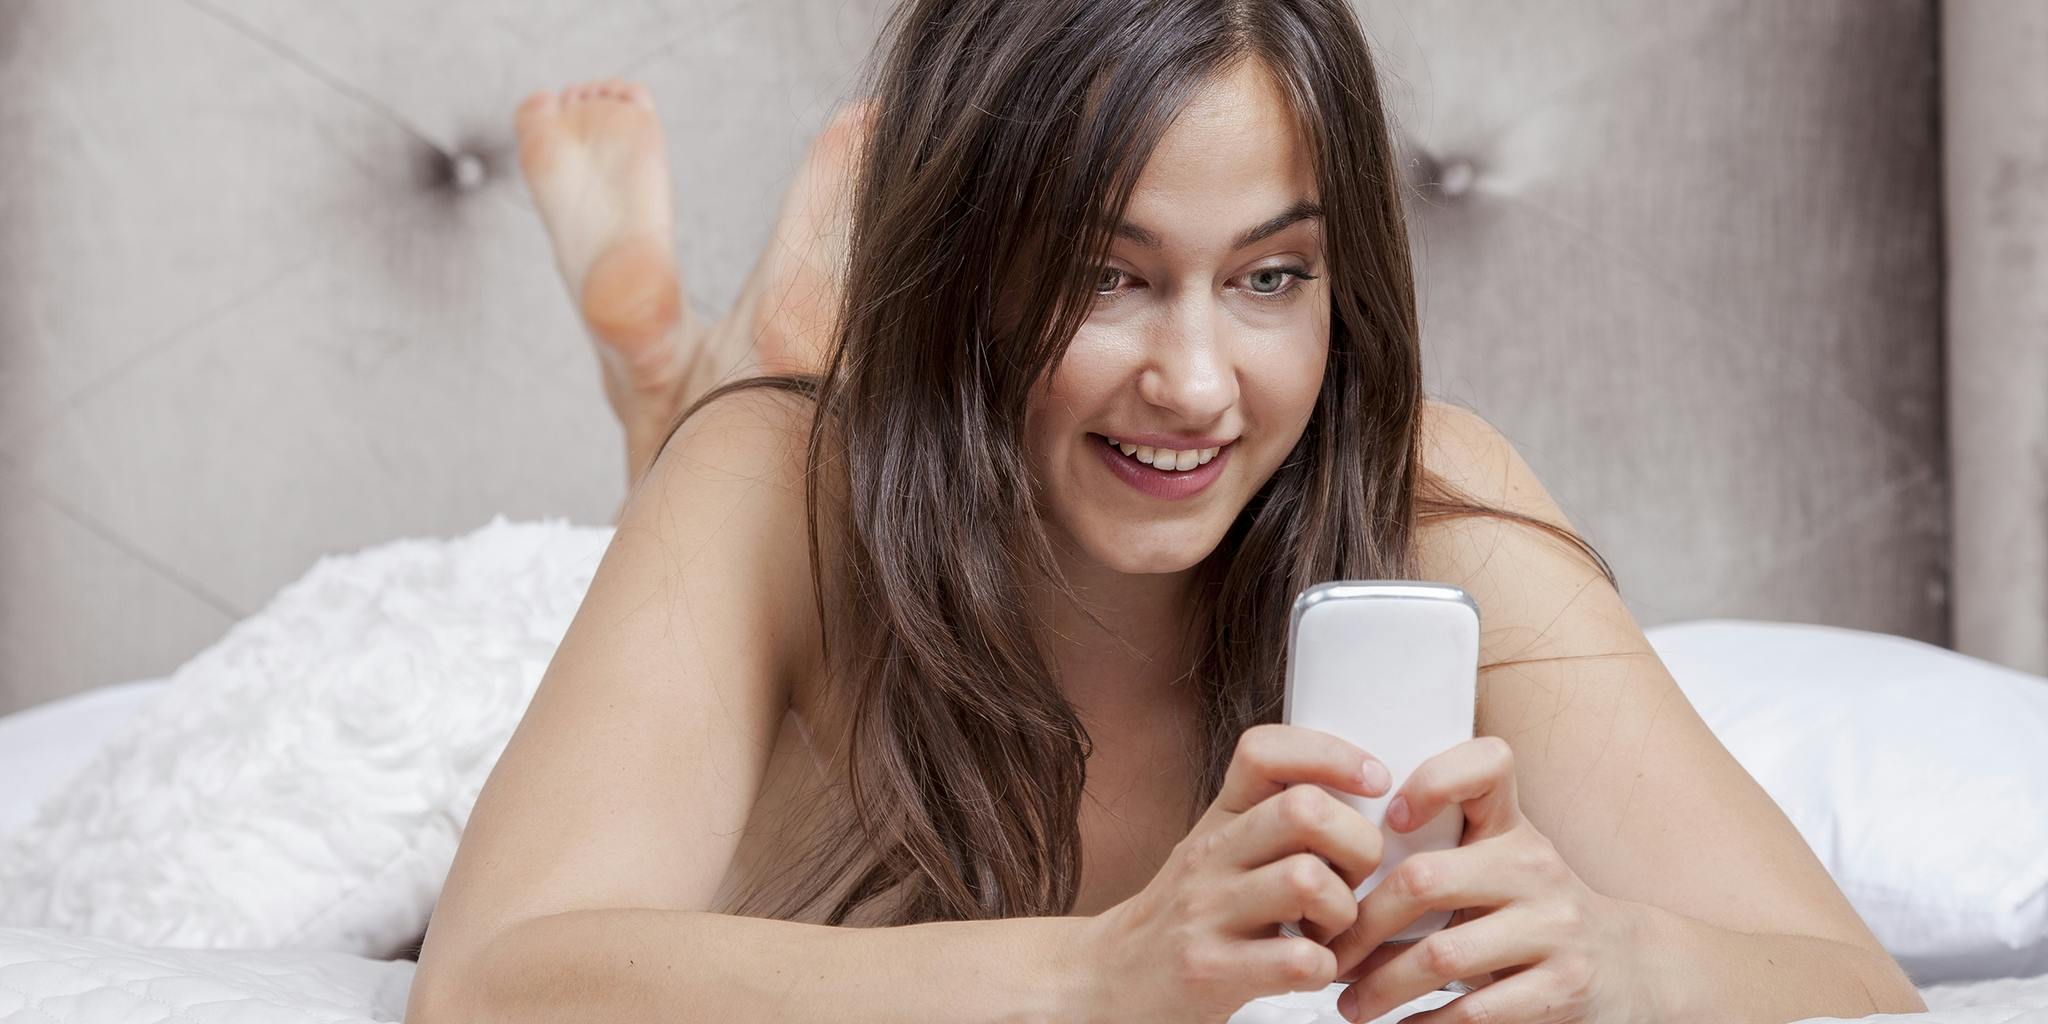 Without Vpn Sex Sides - How to Watch Porn on Your Smartphone Without Catching a Virus